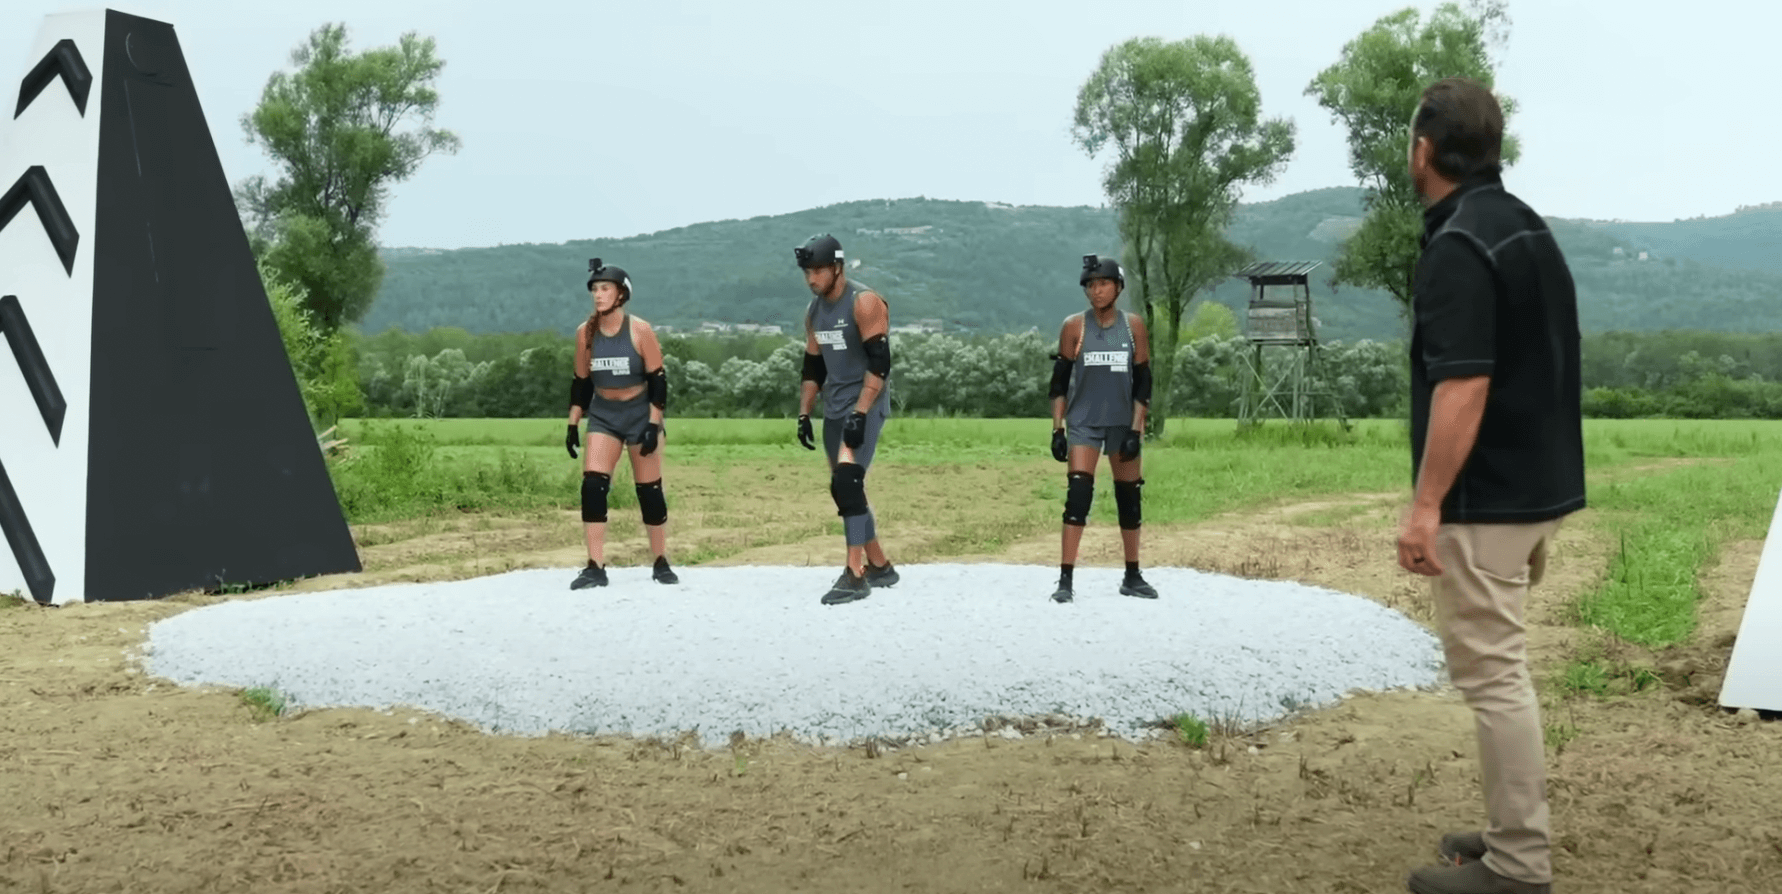 MTV's 'The Challenge' Season 39 competitors Nurys, Olivia, and James about to compete in front of host TJ Lavin